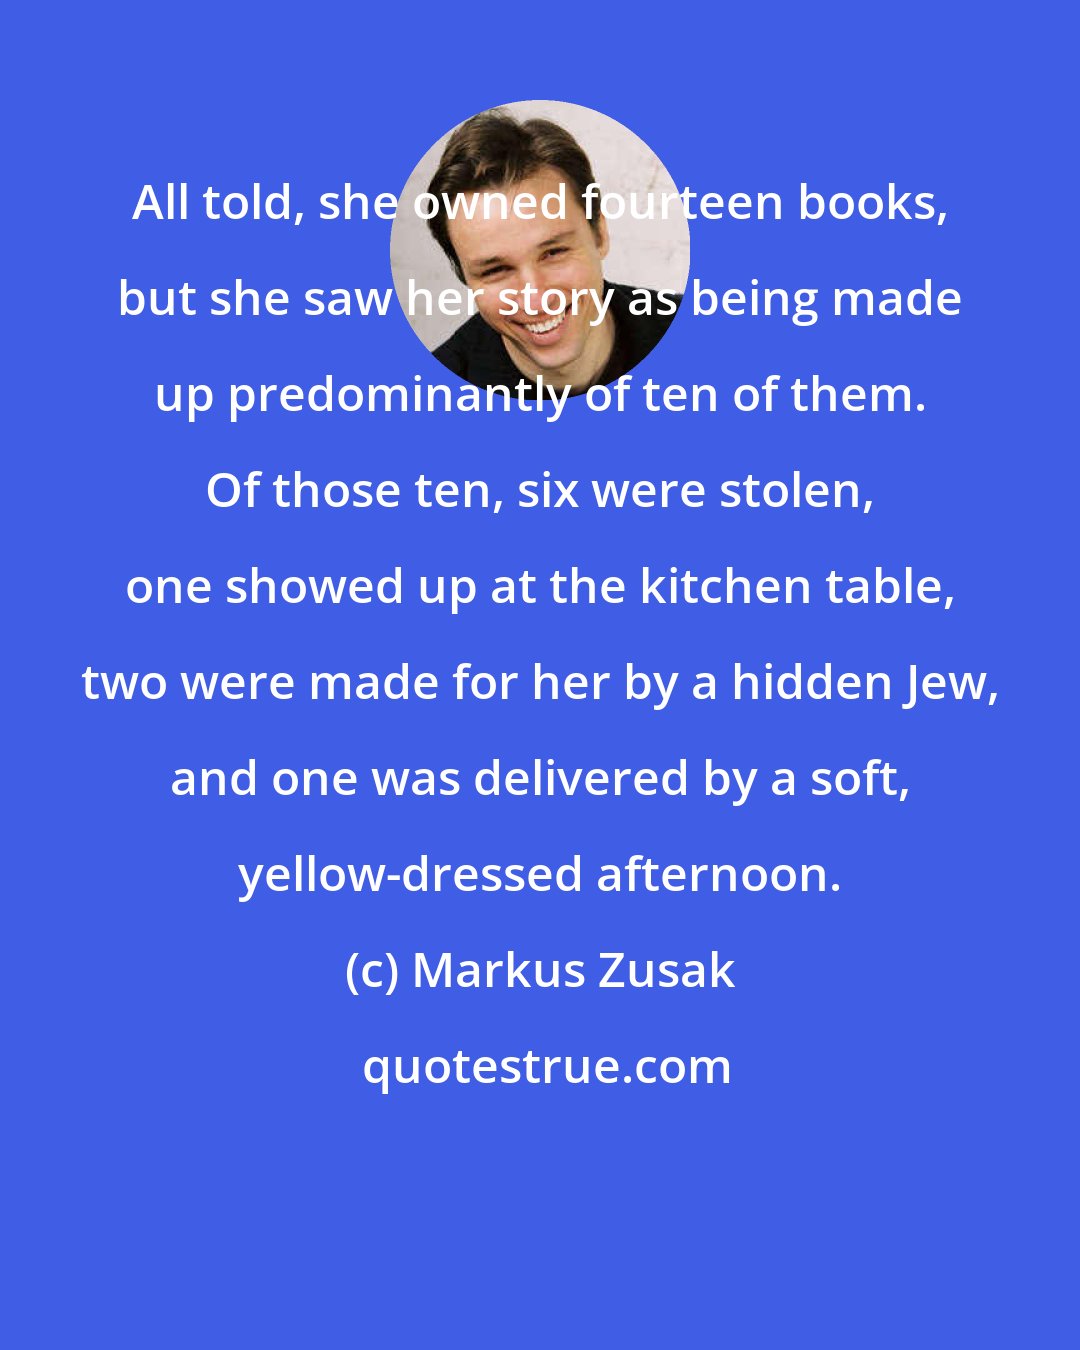 Markus Zusak: All told, she owned fourteen books, but she saw her story as being made up predominantly of ten of them. Of those ten, six were stolen, one showed up at the kitchen table, two were made for her by a hidden Jew, and one was delivered by a soft, yellow-dressed afternoon.